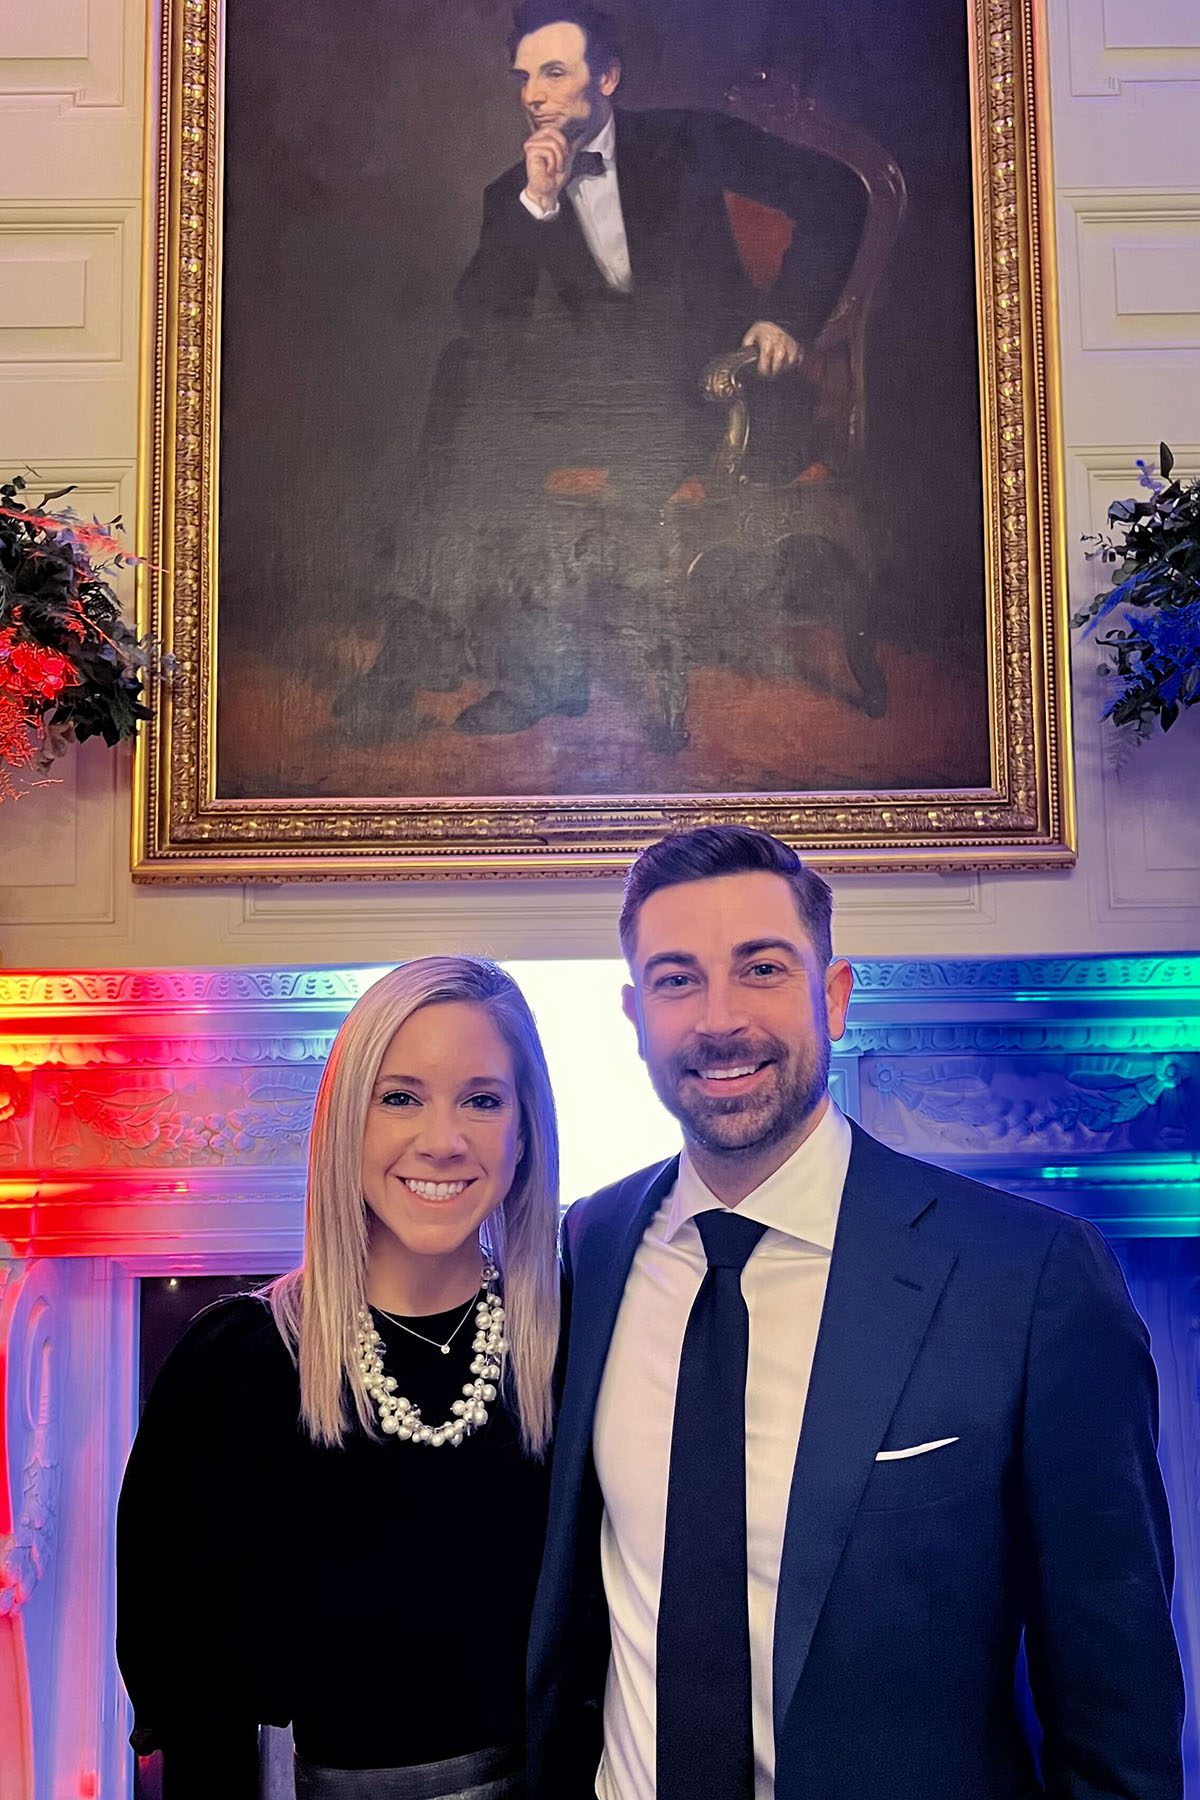 Amanda and Josh Zurawski pose for a picture together as they visit the White House ahead of attending the State of the Union.